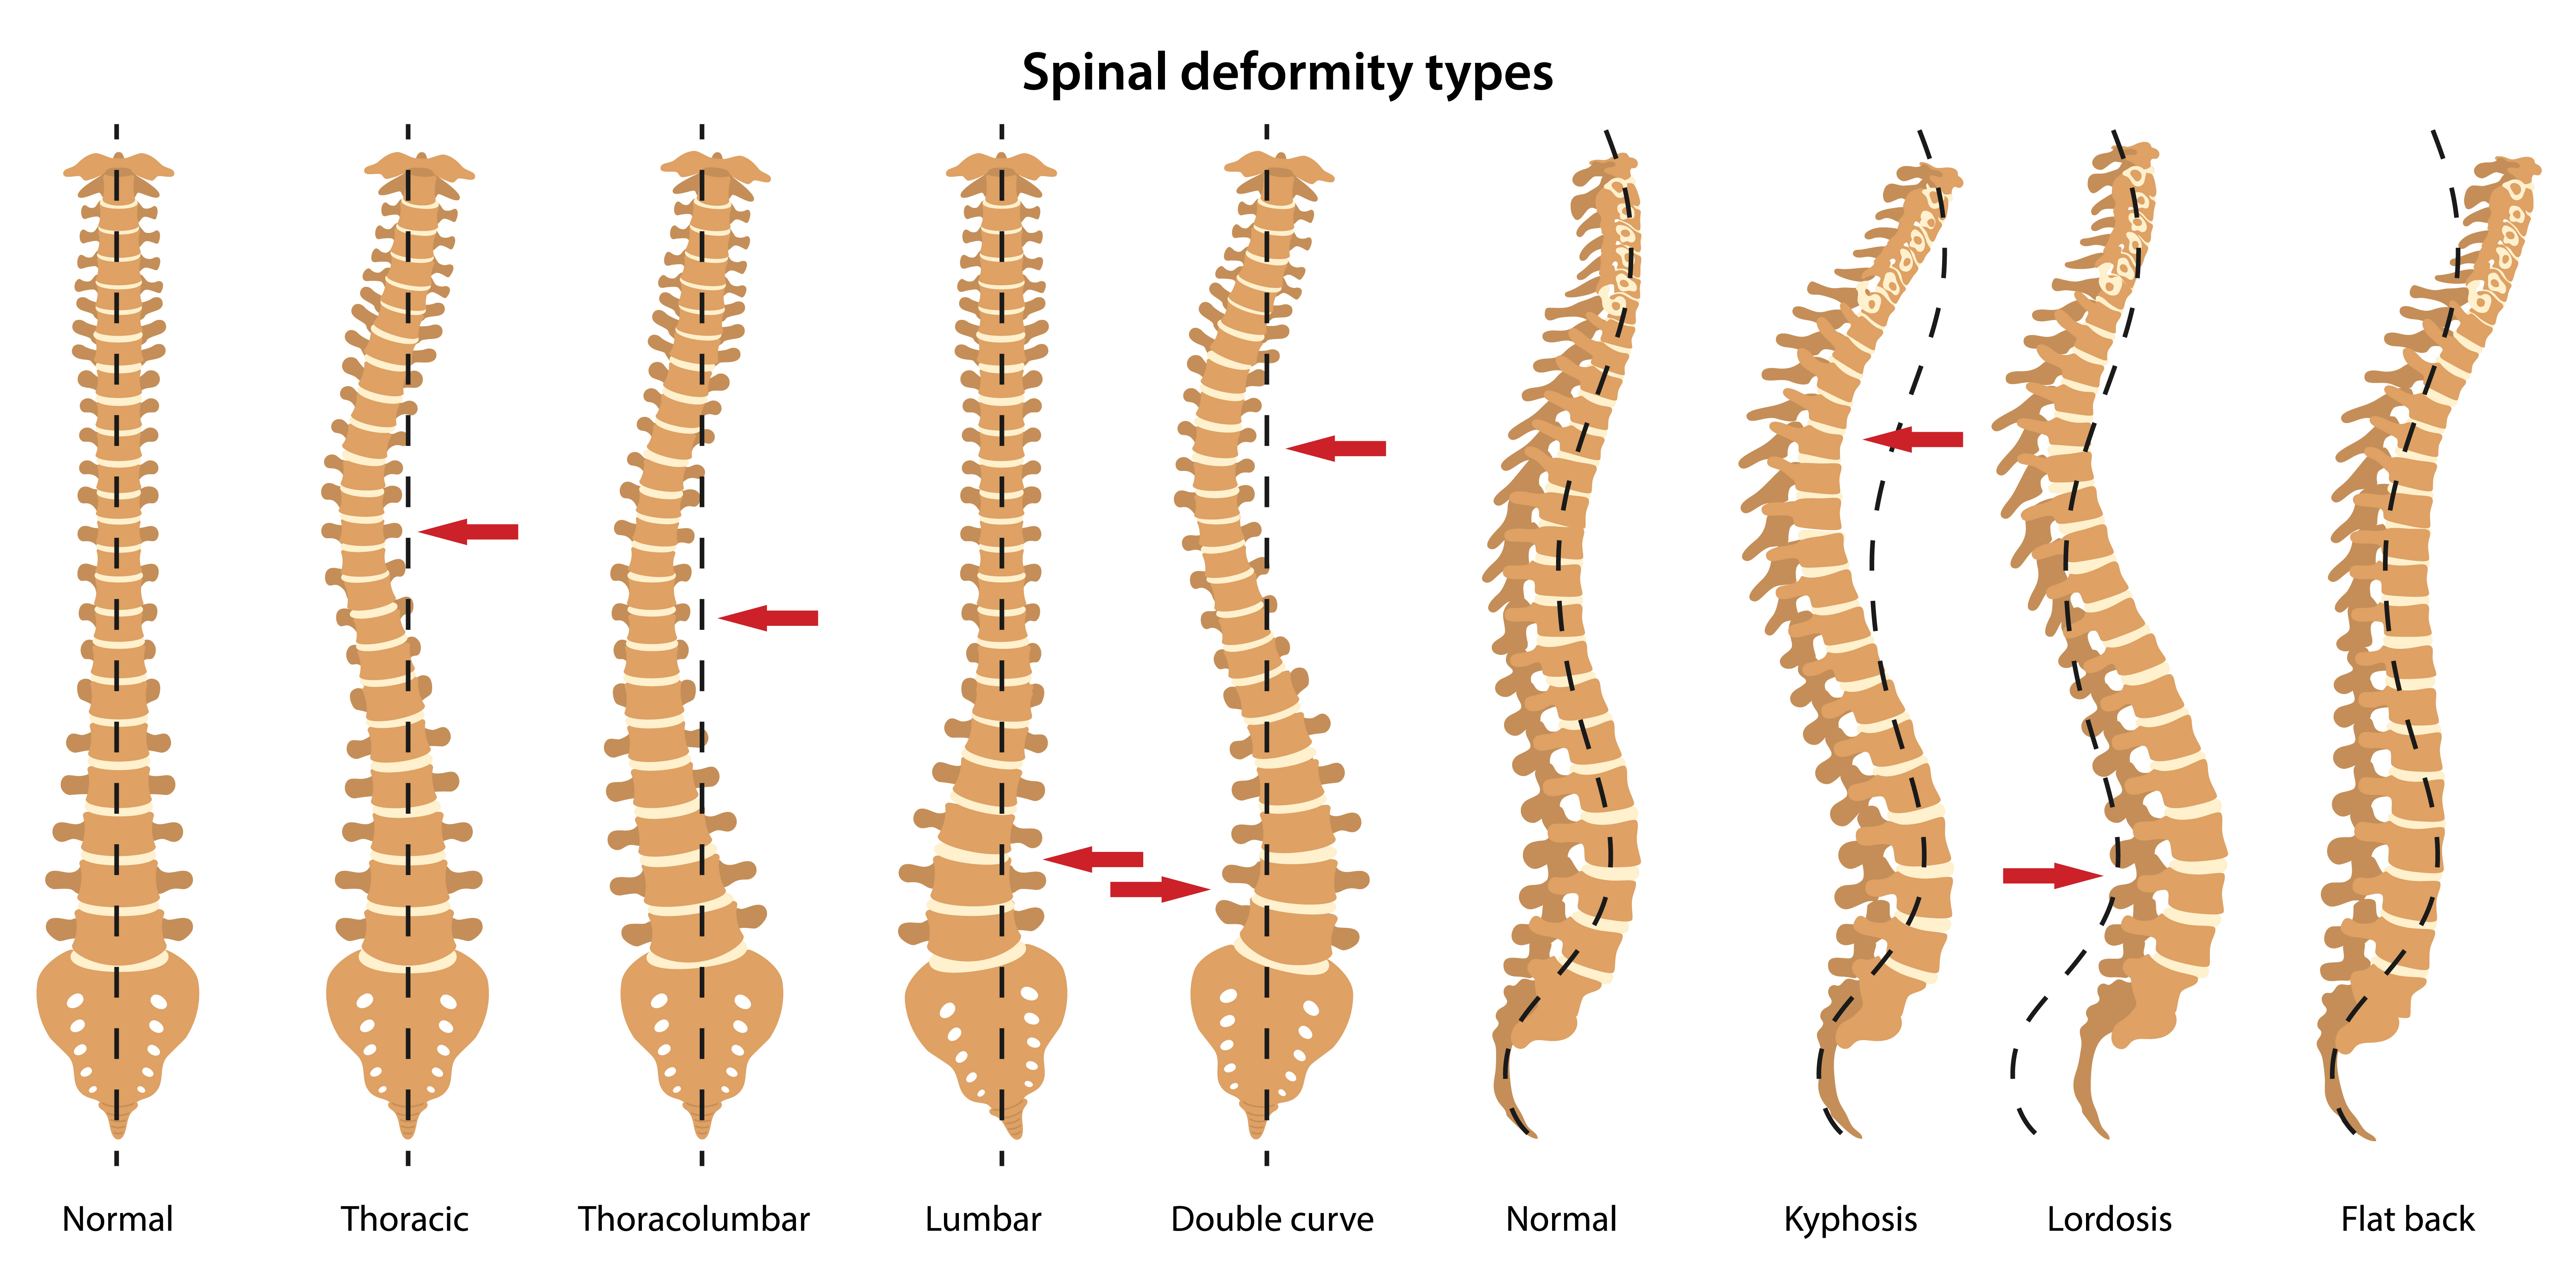 Posture & Curvature of the Spine